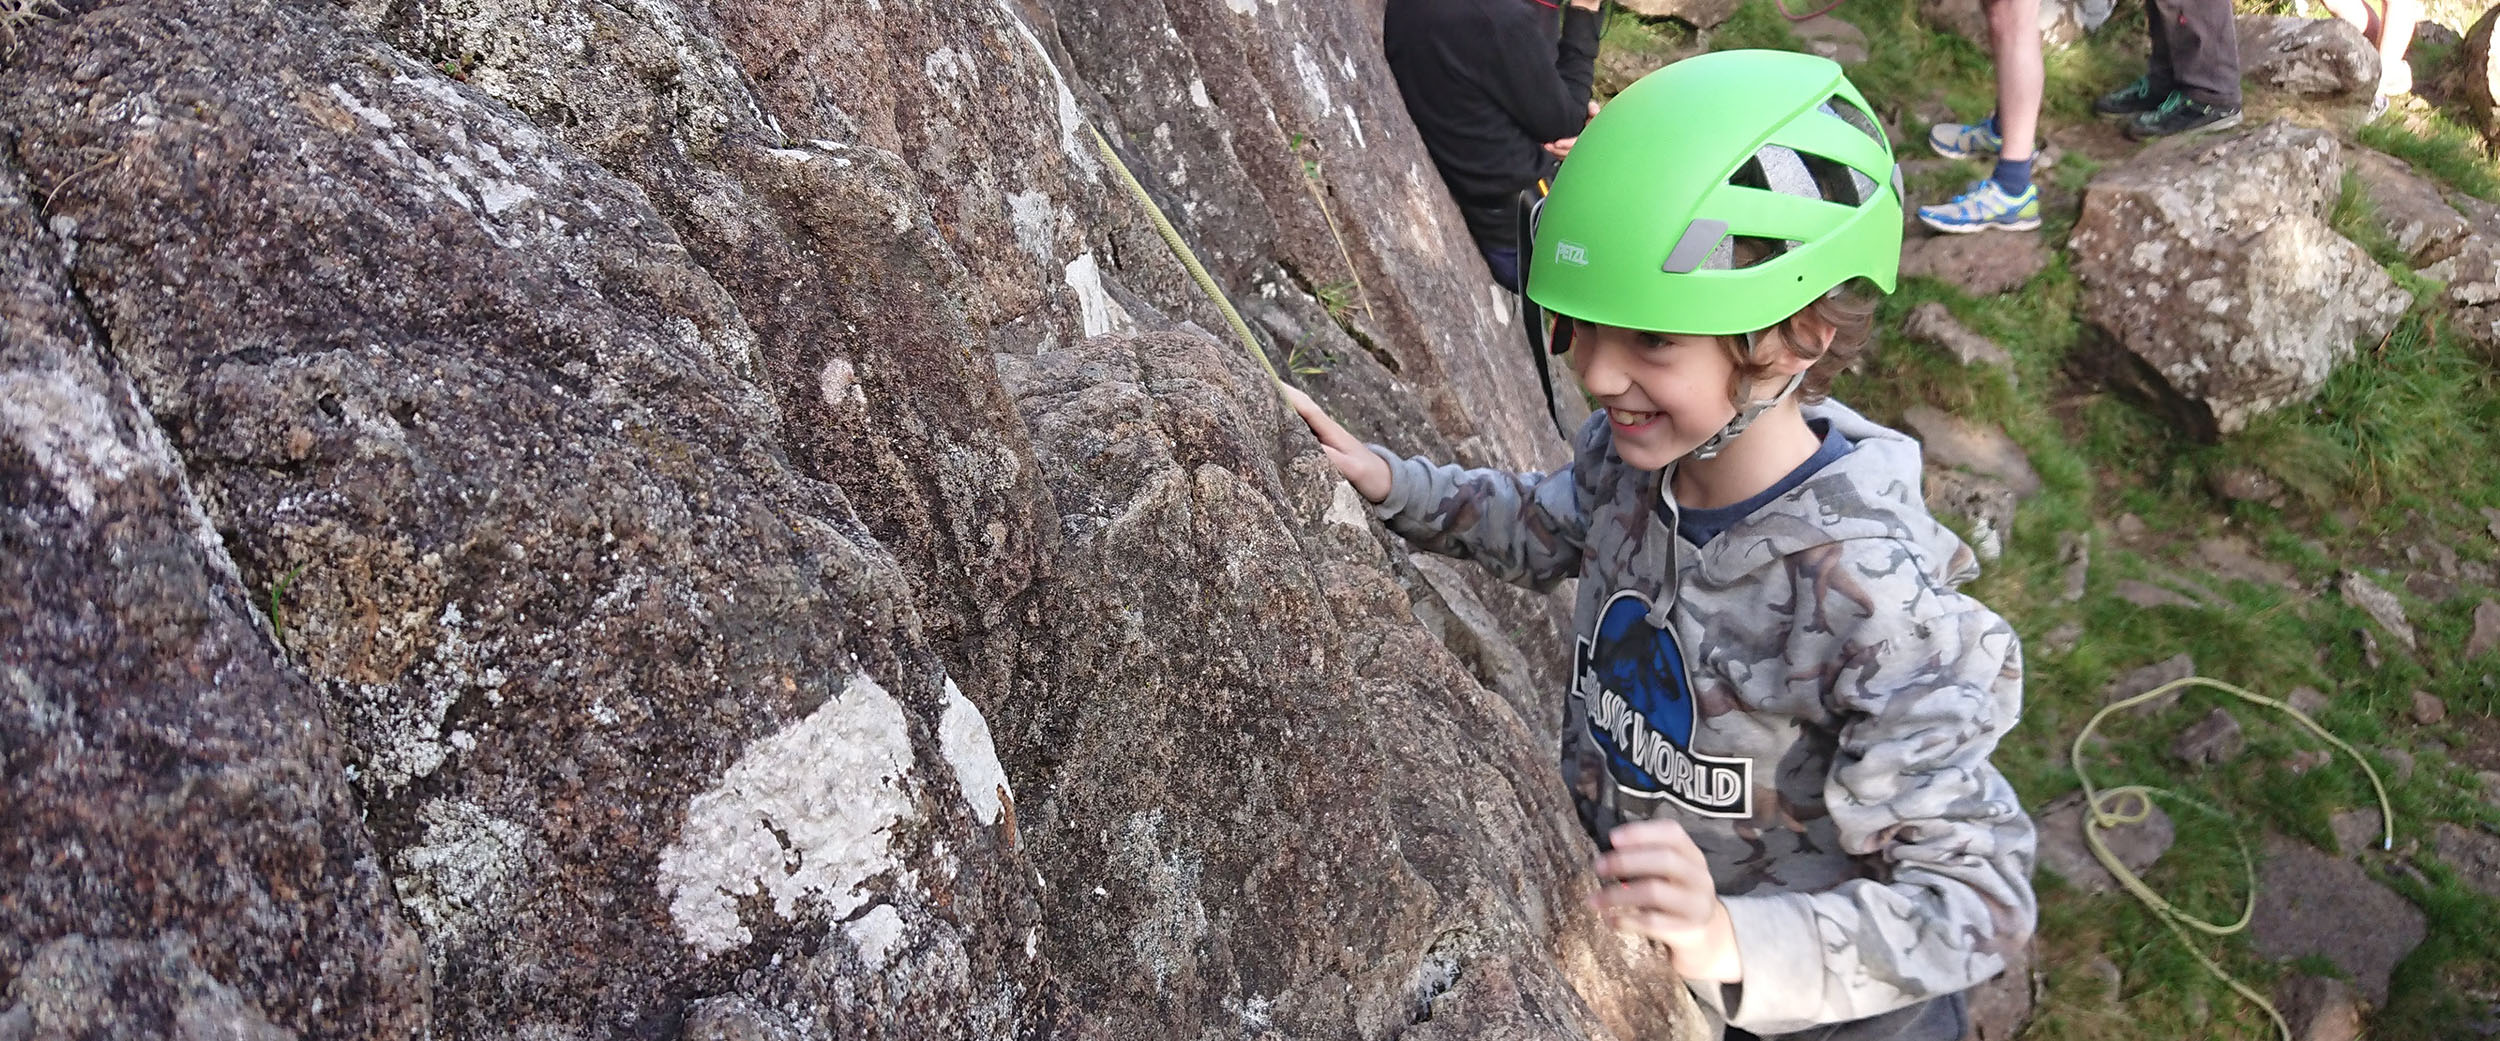 A young boy at the foot off a cliff, wearing a climbing helmet, and a beaming smile